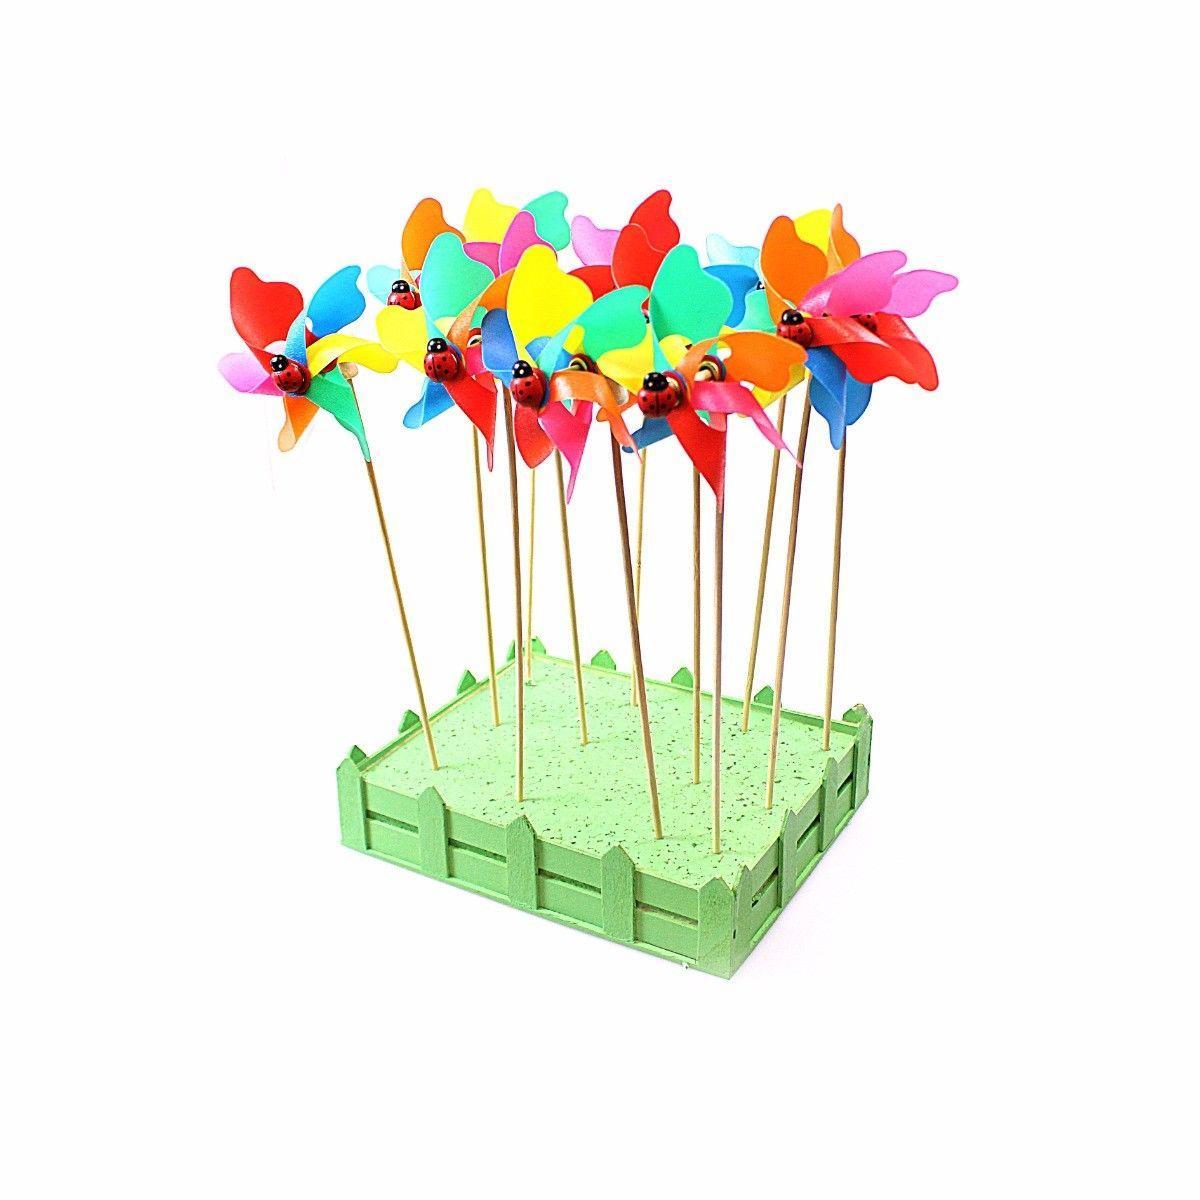 Plastic Colourful Windmill Pinwheel Wind Spinner x 1 Outdoor Garden Party Decor 2117 (Parcel Rate)